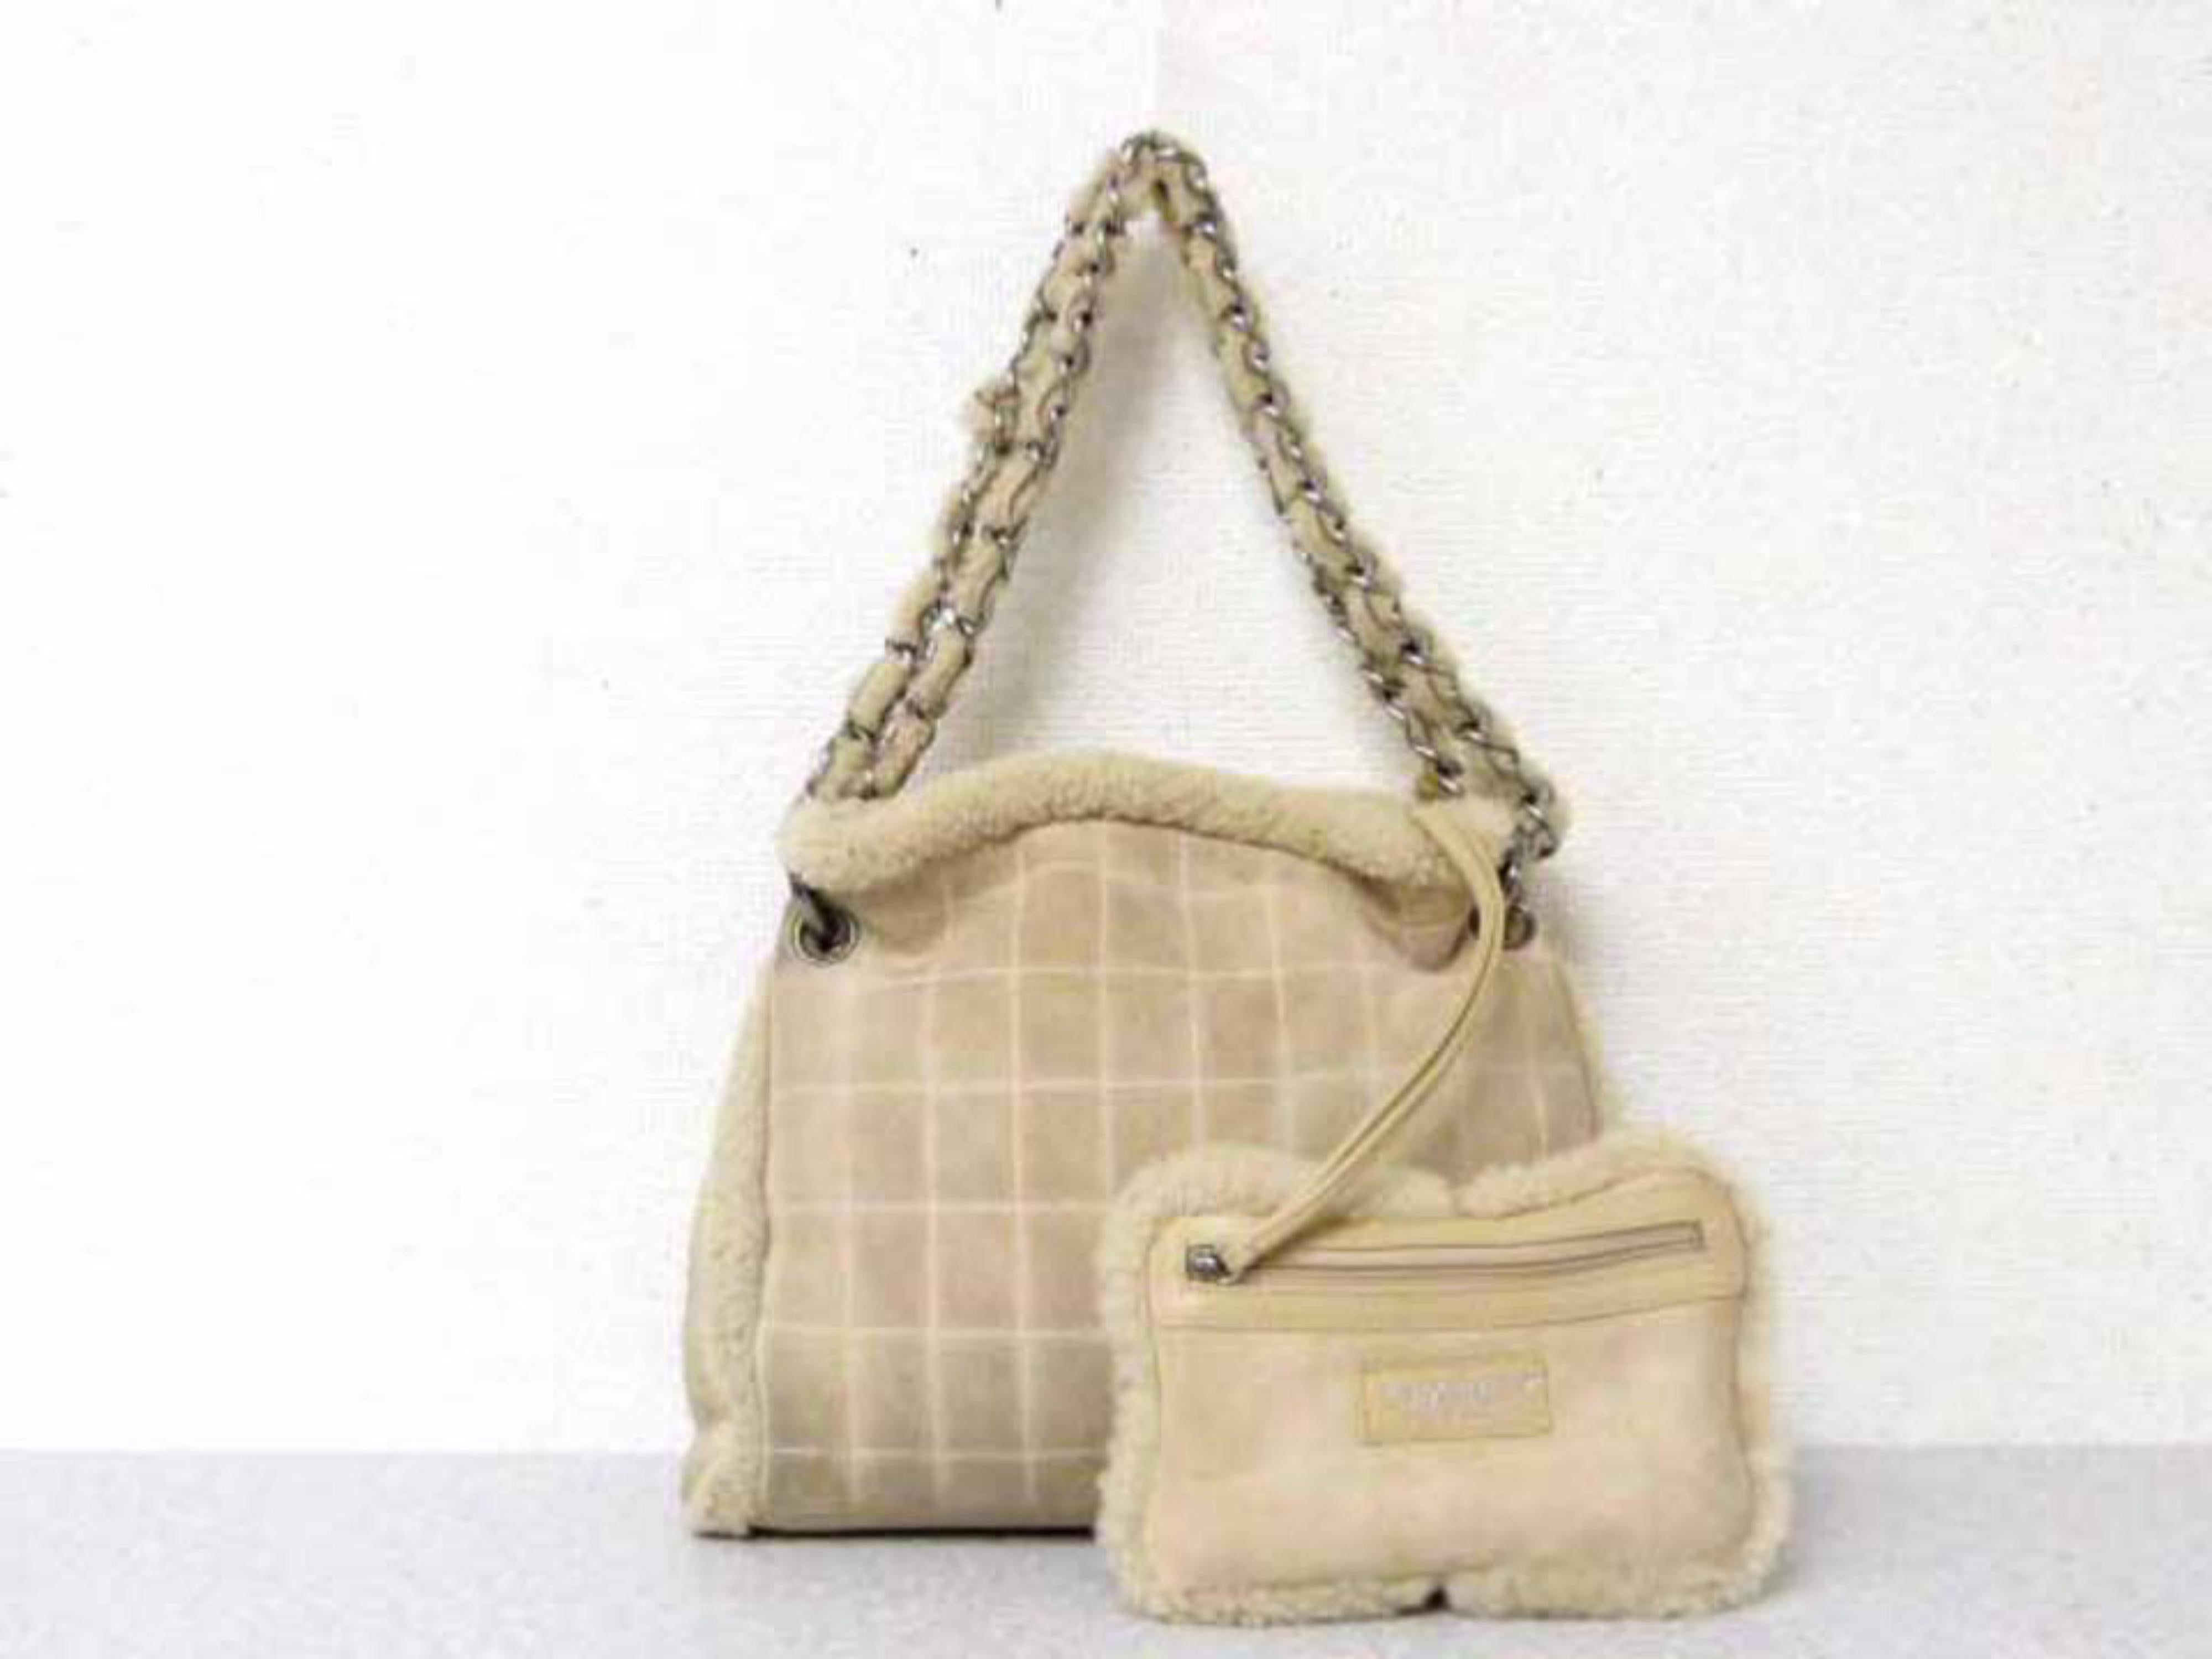 Chanel Chain Tote W/ Pouch 226196 Beige Shearling Wool Shoulder Bag For Sale 2